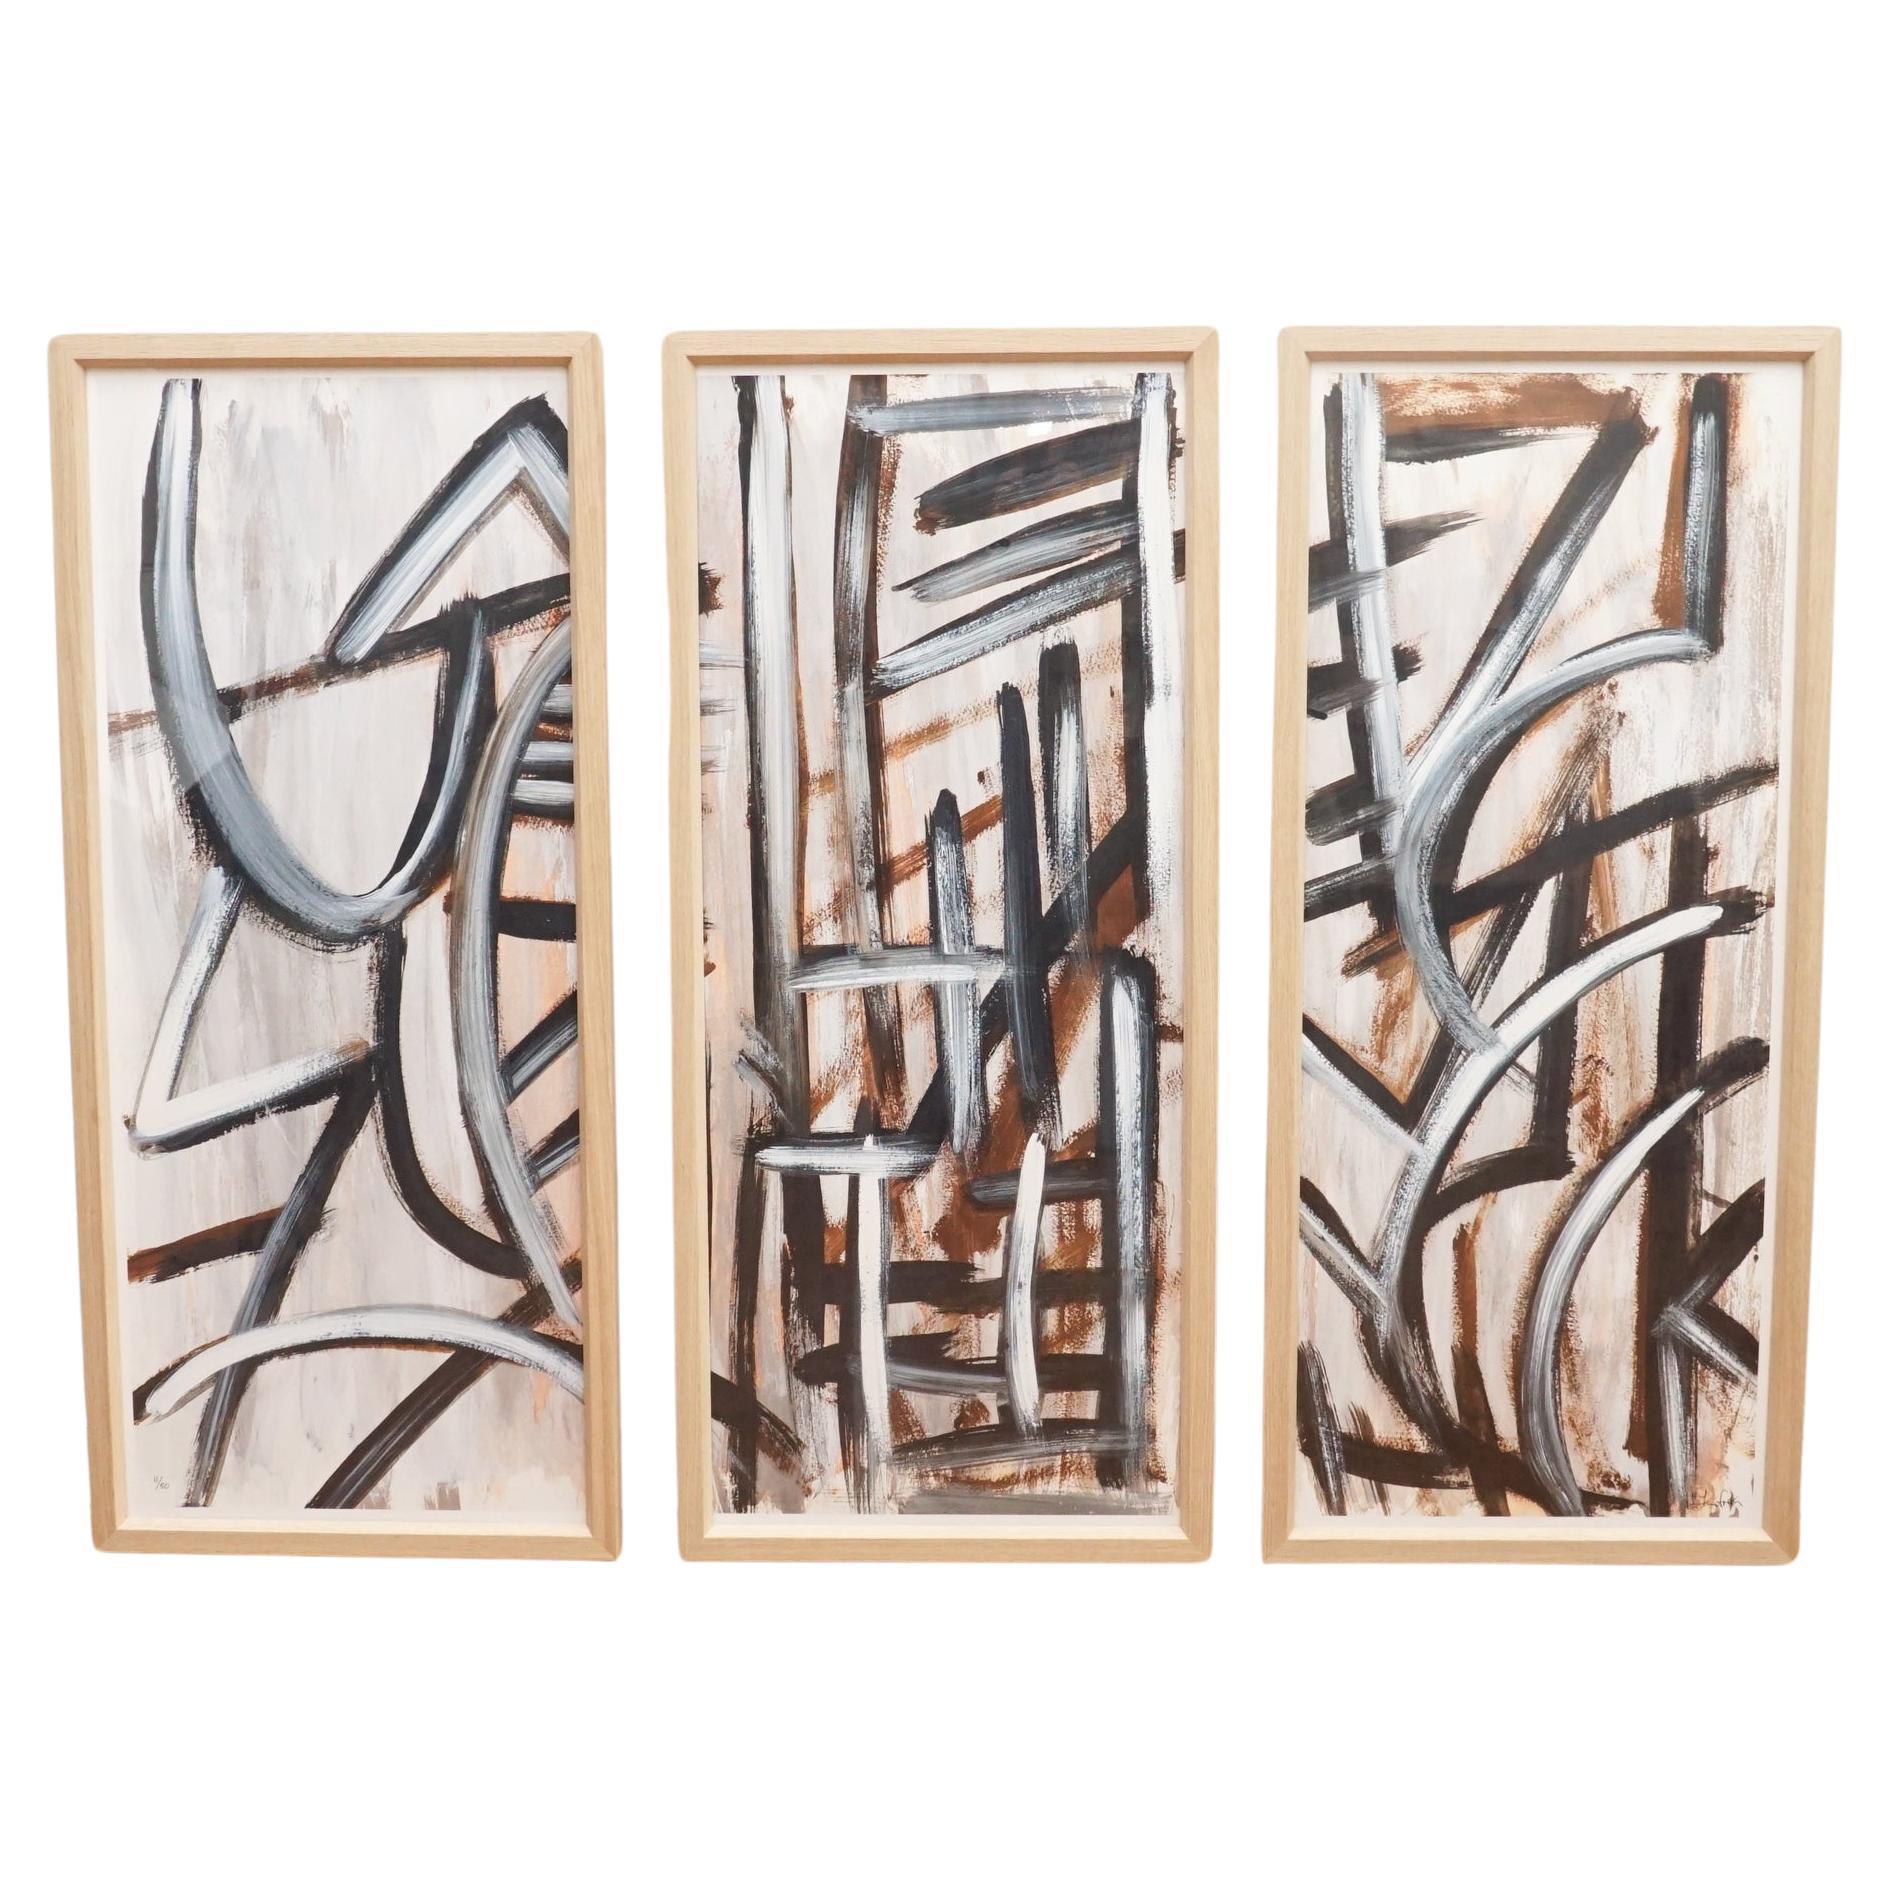 Abstract art "Earthbeat" Triptych by Jan Erika For Sale